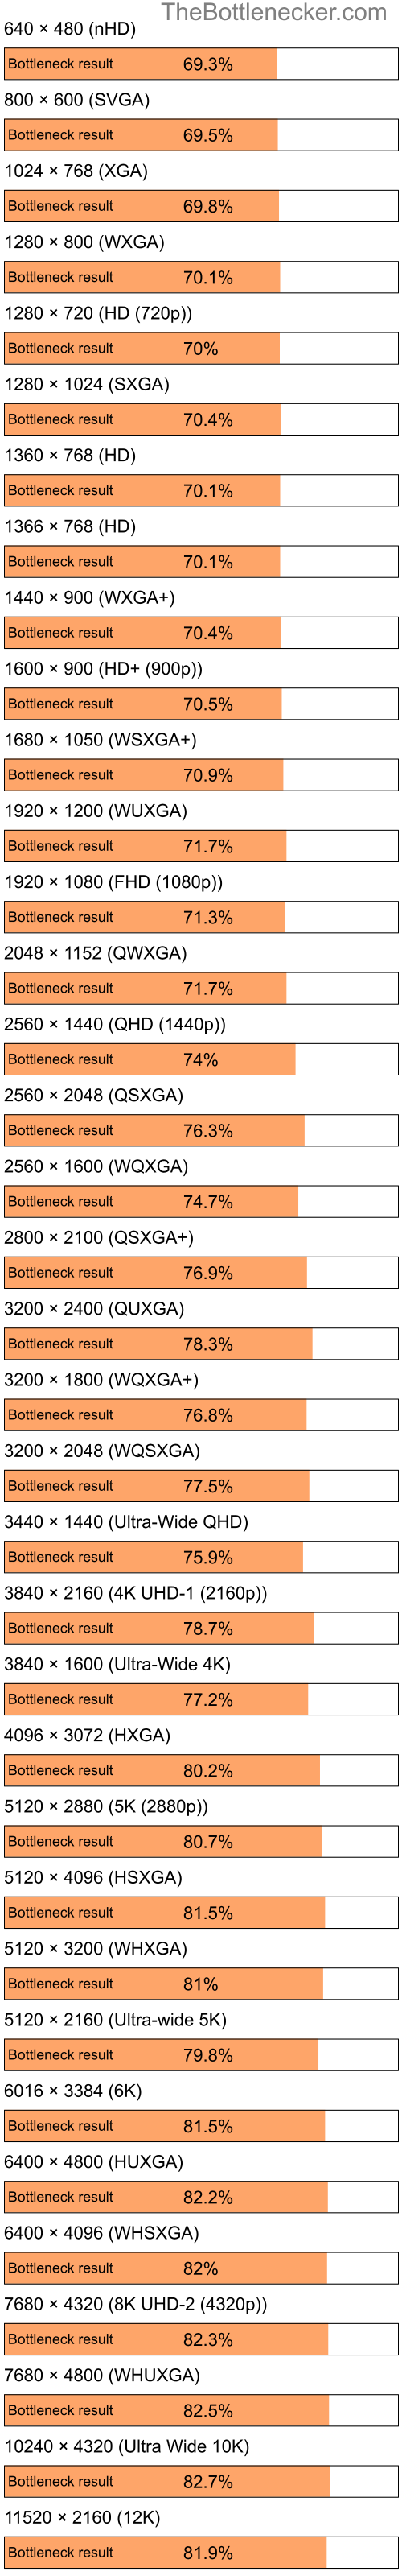 Bottleneck results by resolution for Intel Celeron M 420 and AMD Mobility Radeon X1300 in Processor Intense Tasks